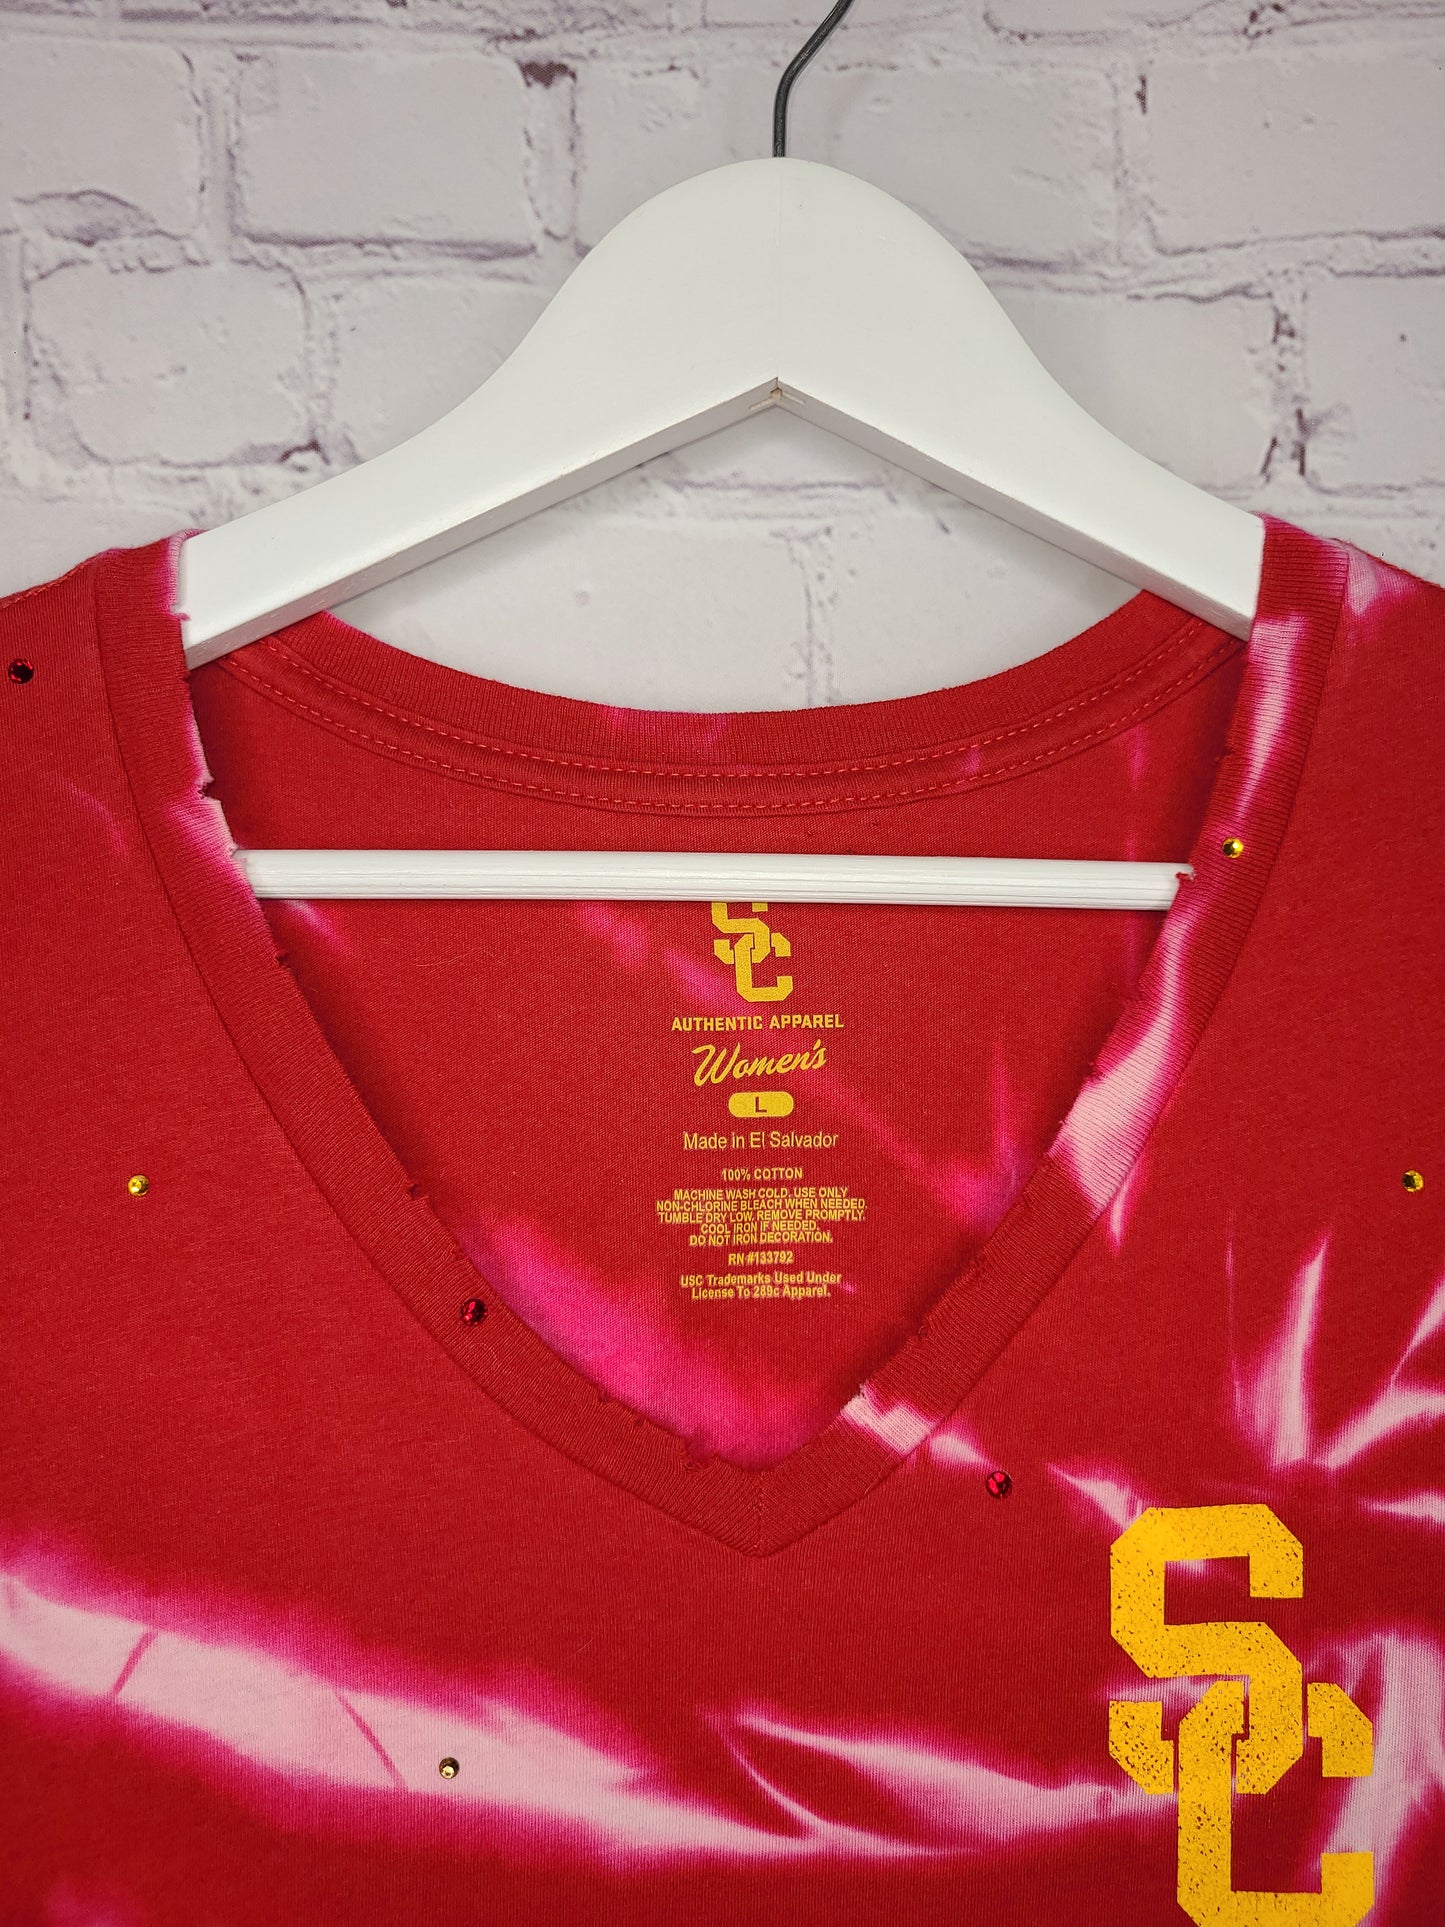 USC Trojans Fitted Tee